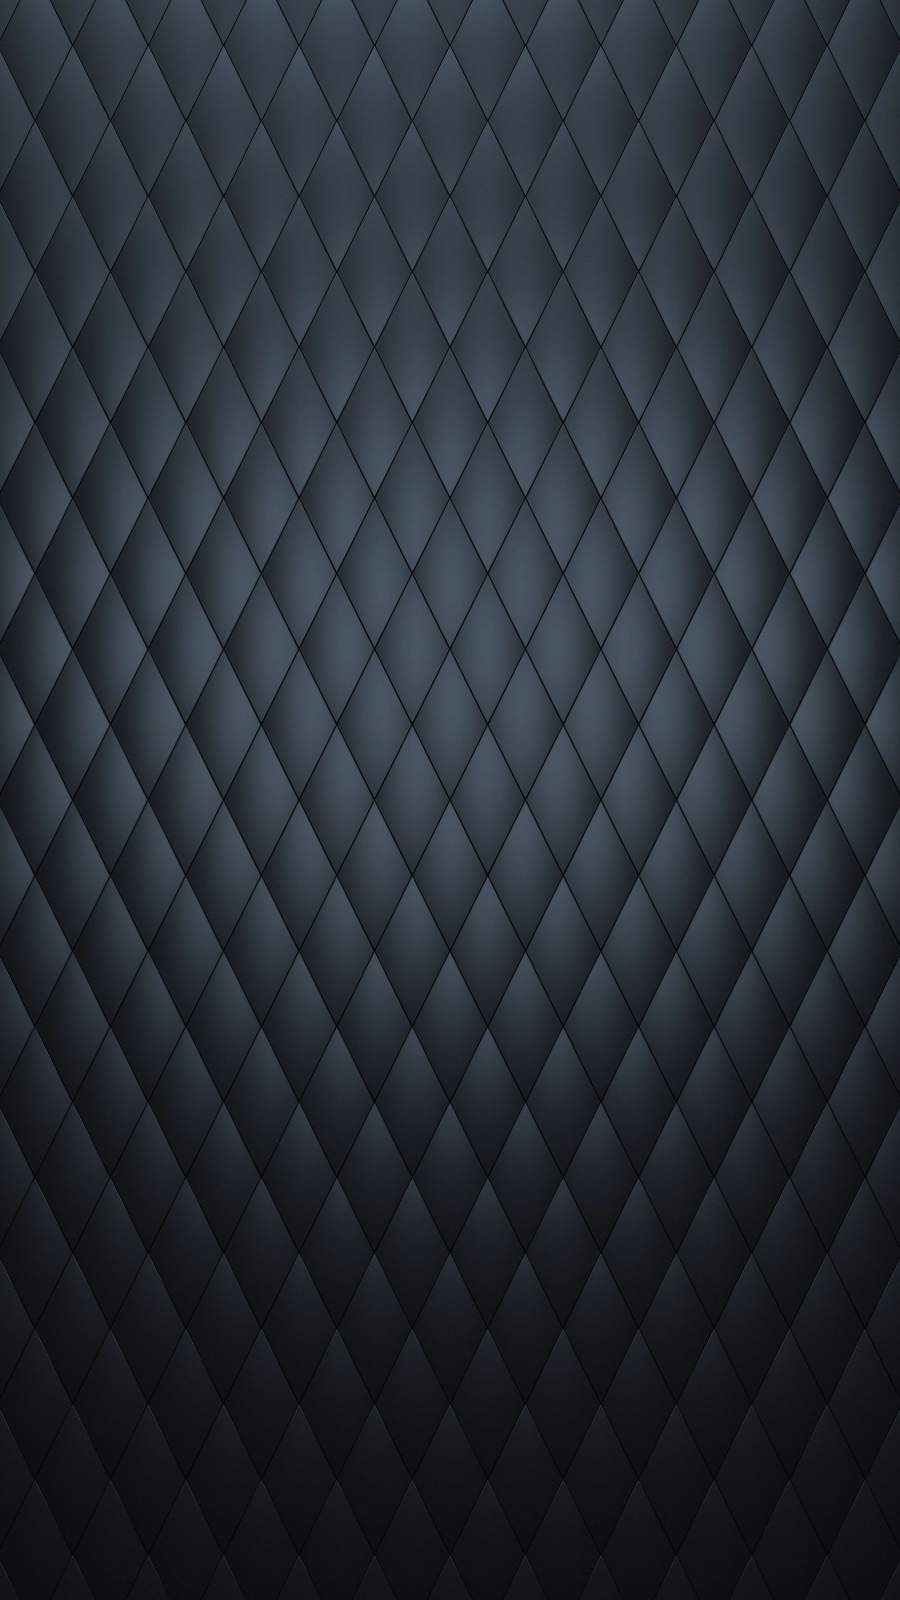 Leather Texture IPhone Wallpaper - IPhone Wallpapers : iPhone Wallpapers